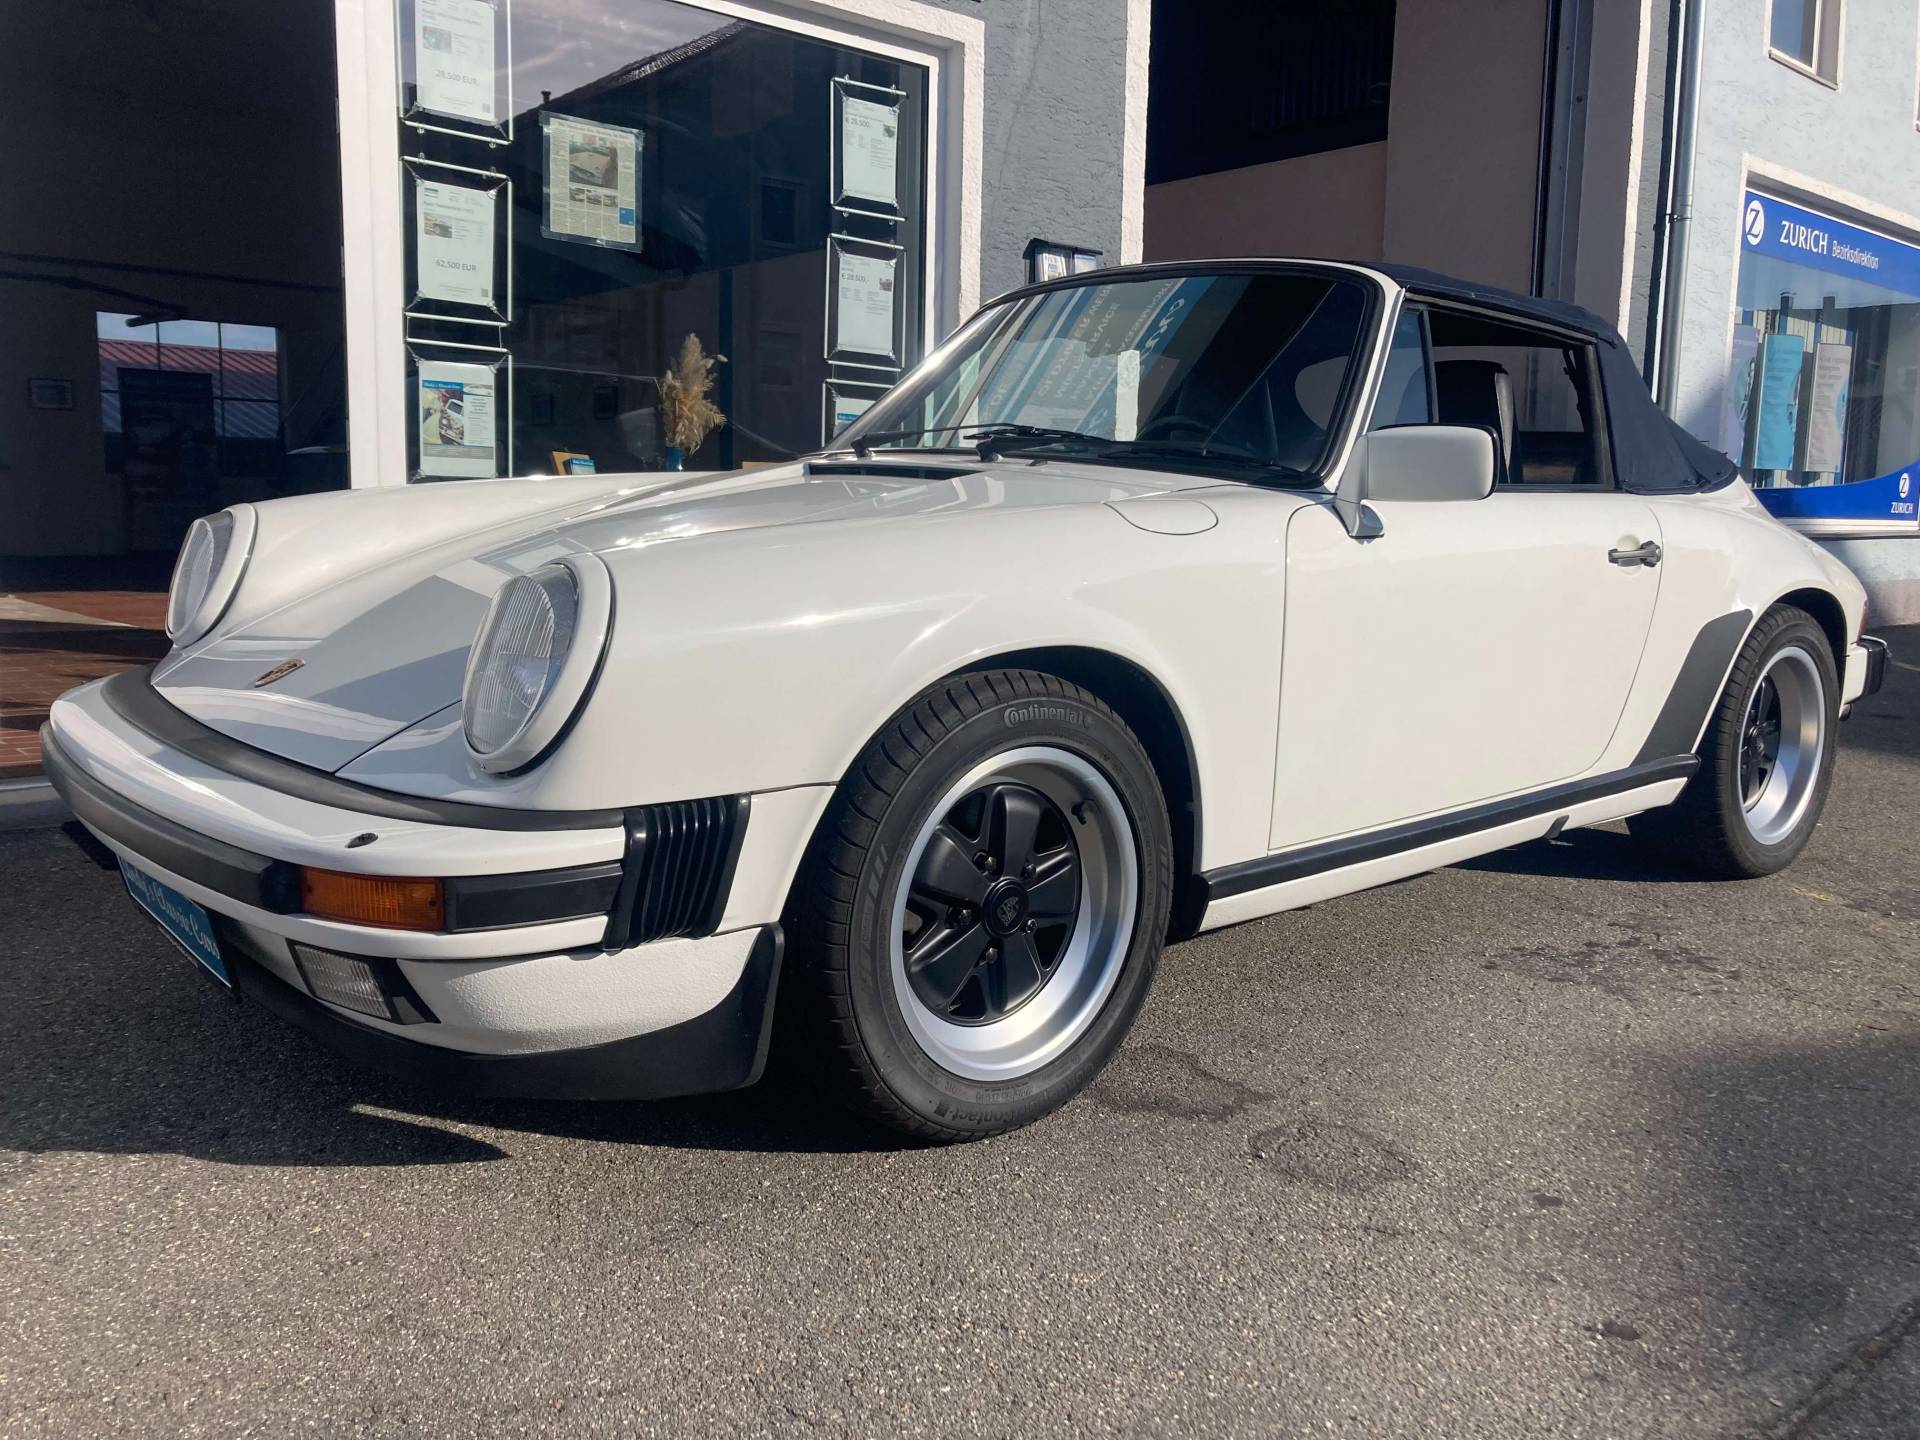 Porsche 911 G-Modell Classic Cars for Sale - Classic Trader